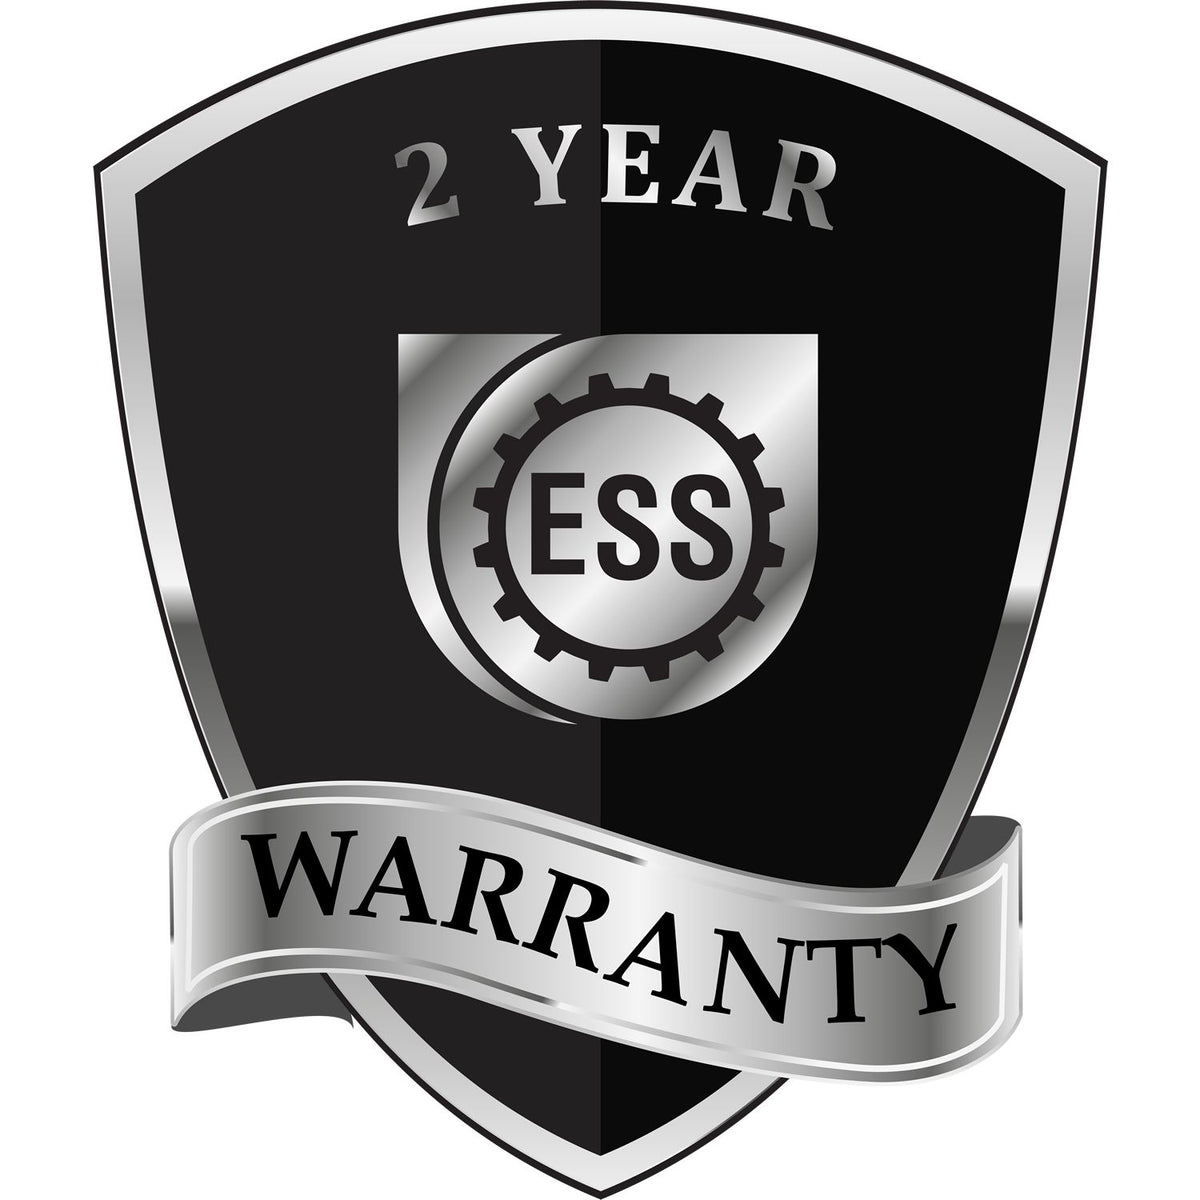 A black and silver badge or emblem showing warranty information for the Tennessee Geologist Desk Seal